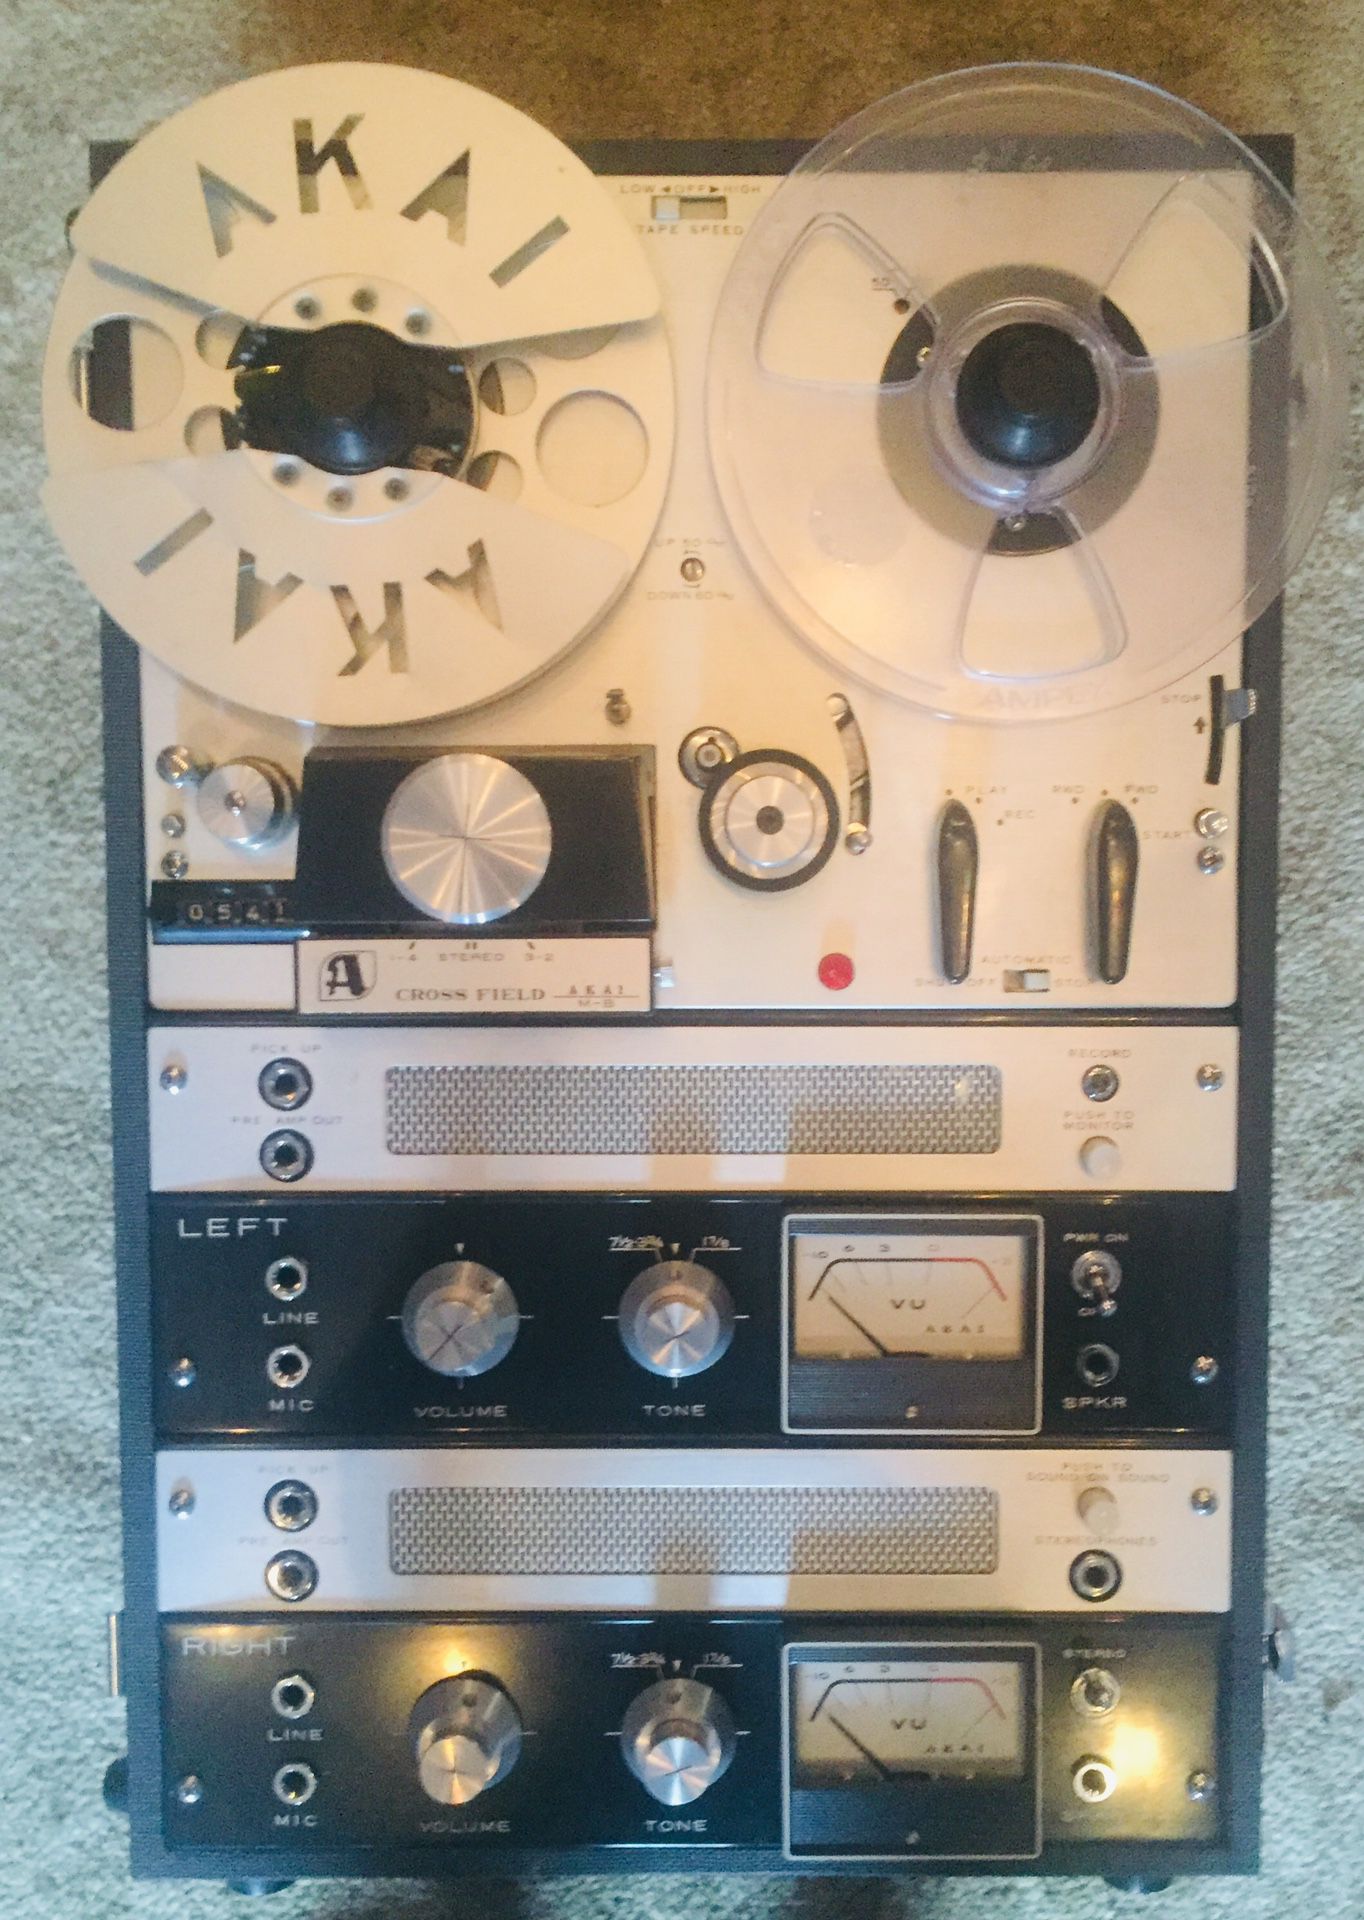 Akai M-8 Reel To Reel Tape Recorder for Sale in Portland, OR - OfferUp